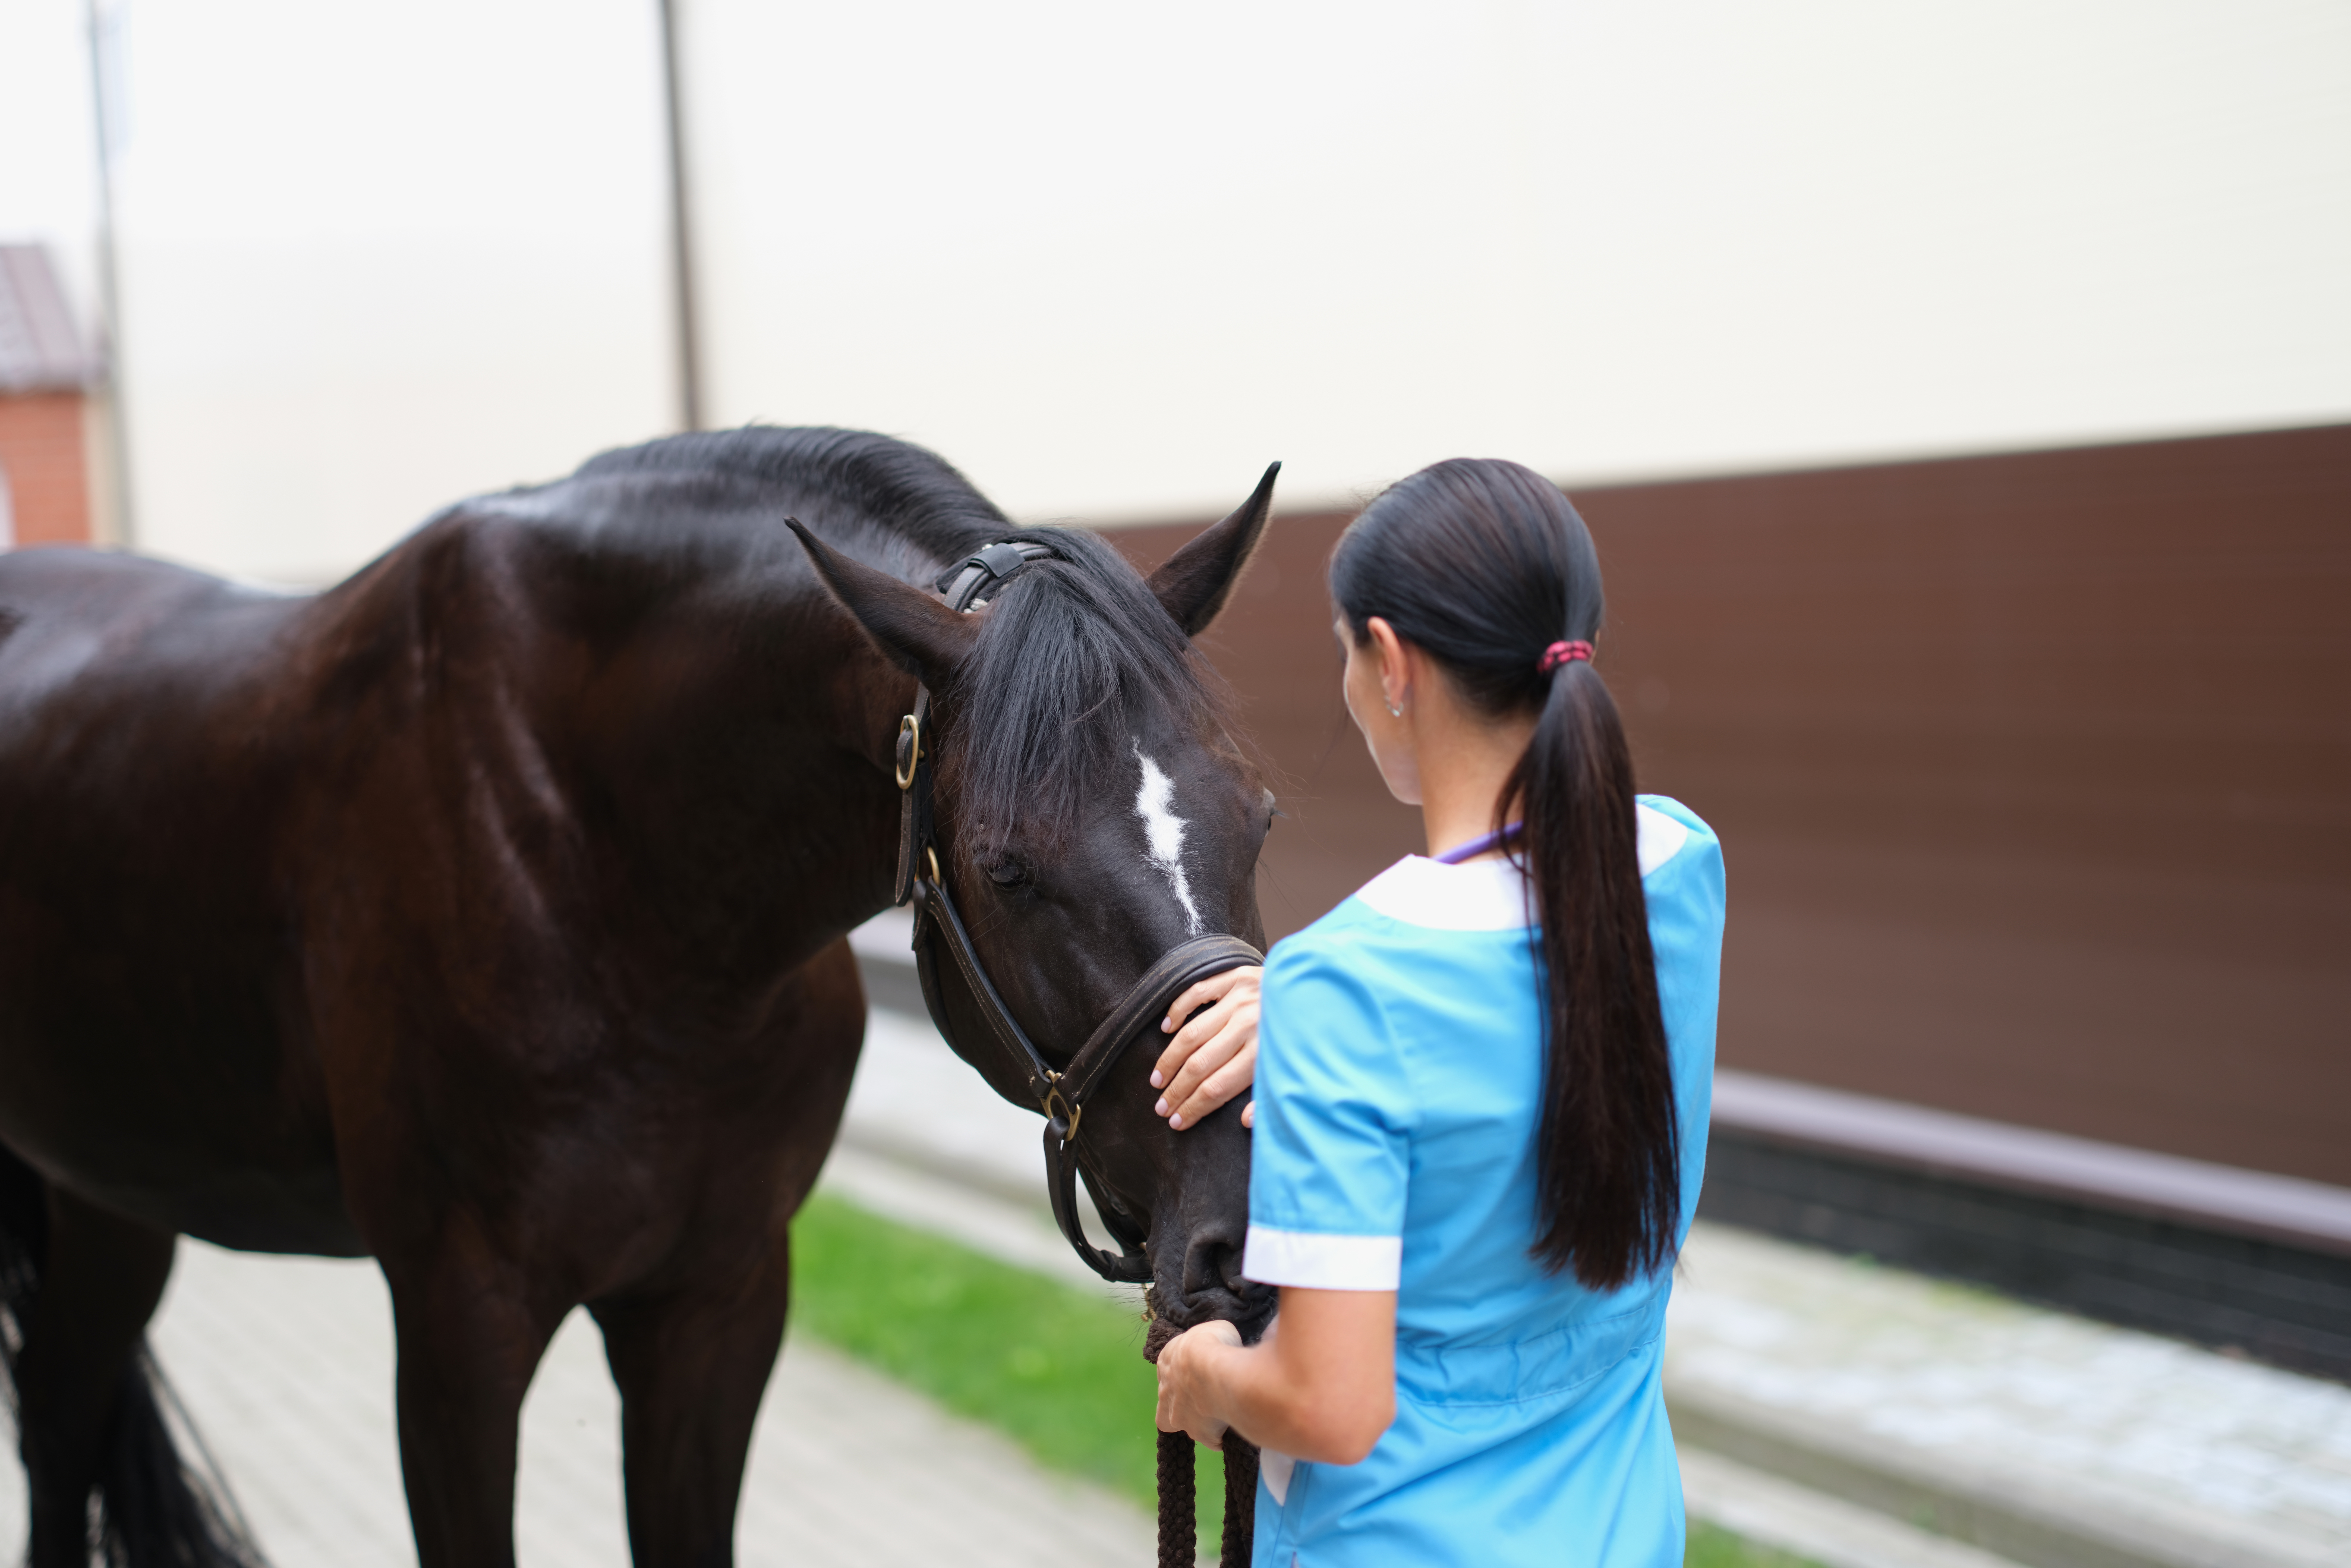 Veterinarian stroking horse, providing equine emergency services